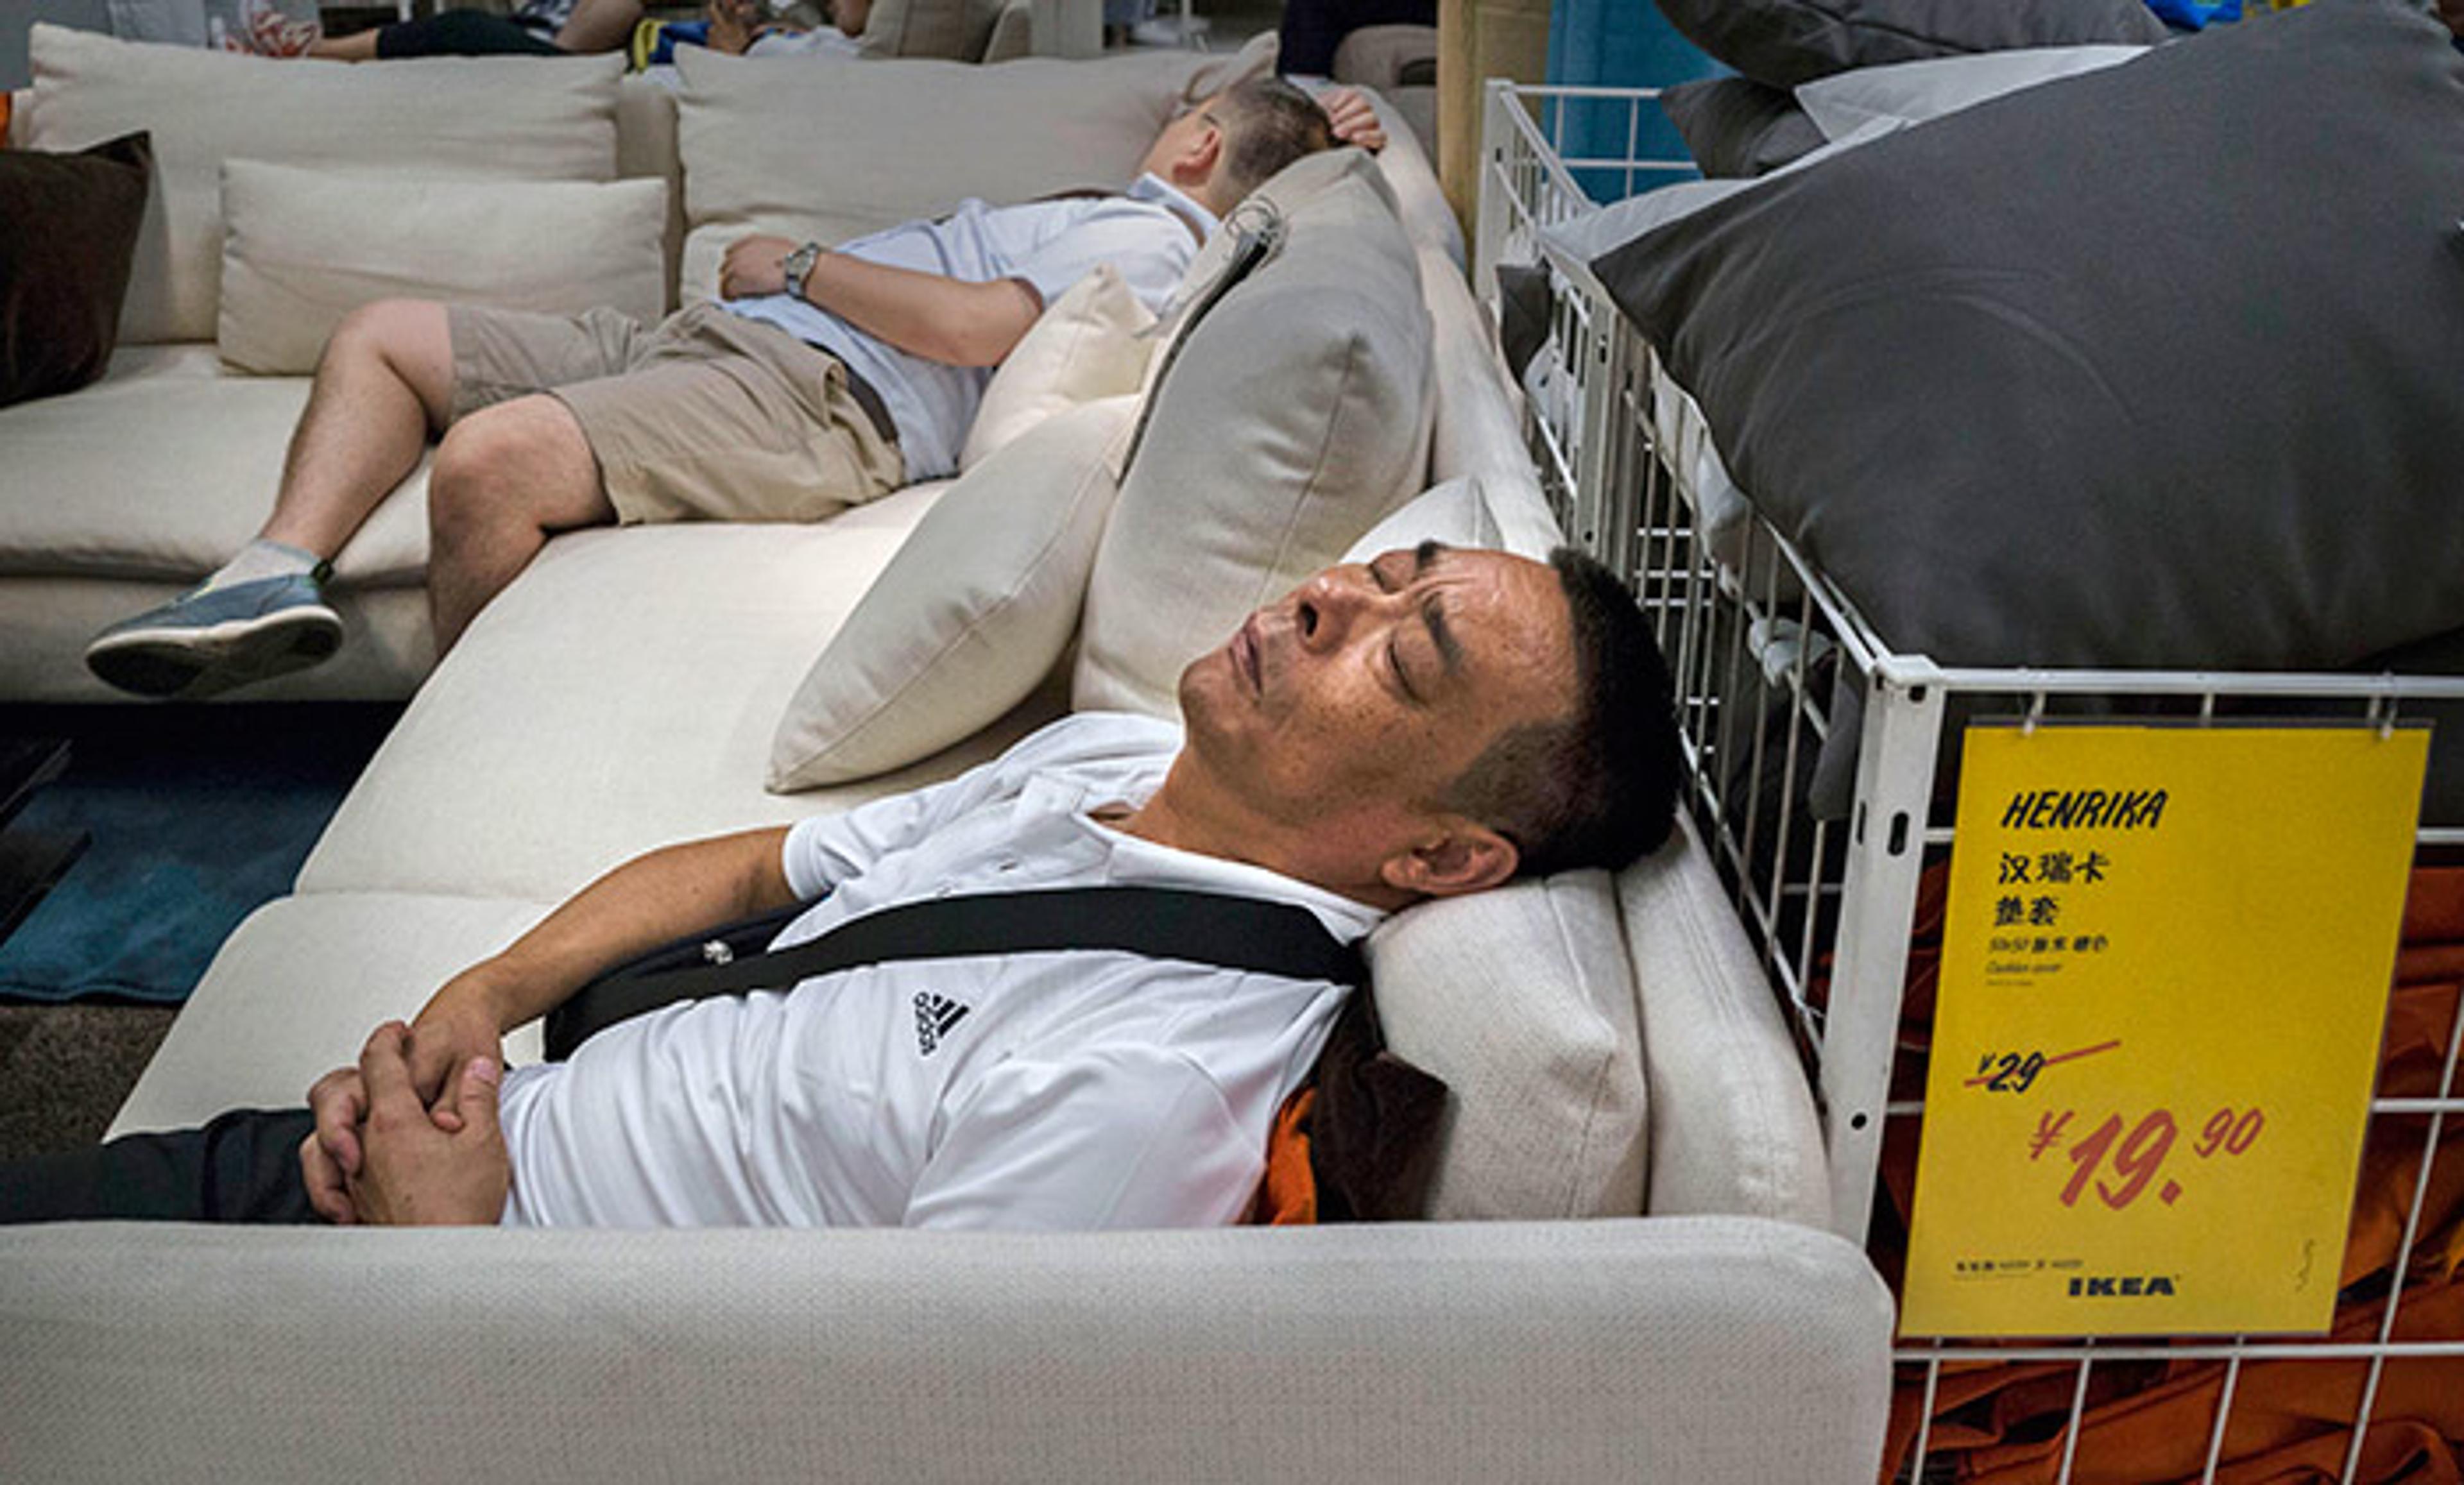 <p>All too much; Ikea shoppers overwhelmed in the showroom, 6 July 2014, Beijing, China. <em>Photo by Kevin Frayer/Getty</em></p>